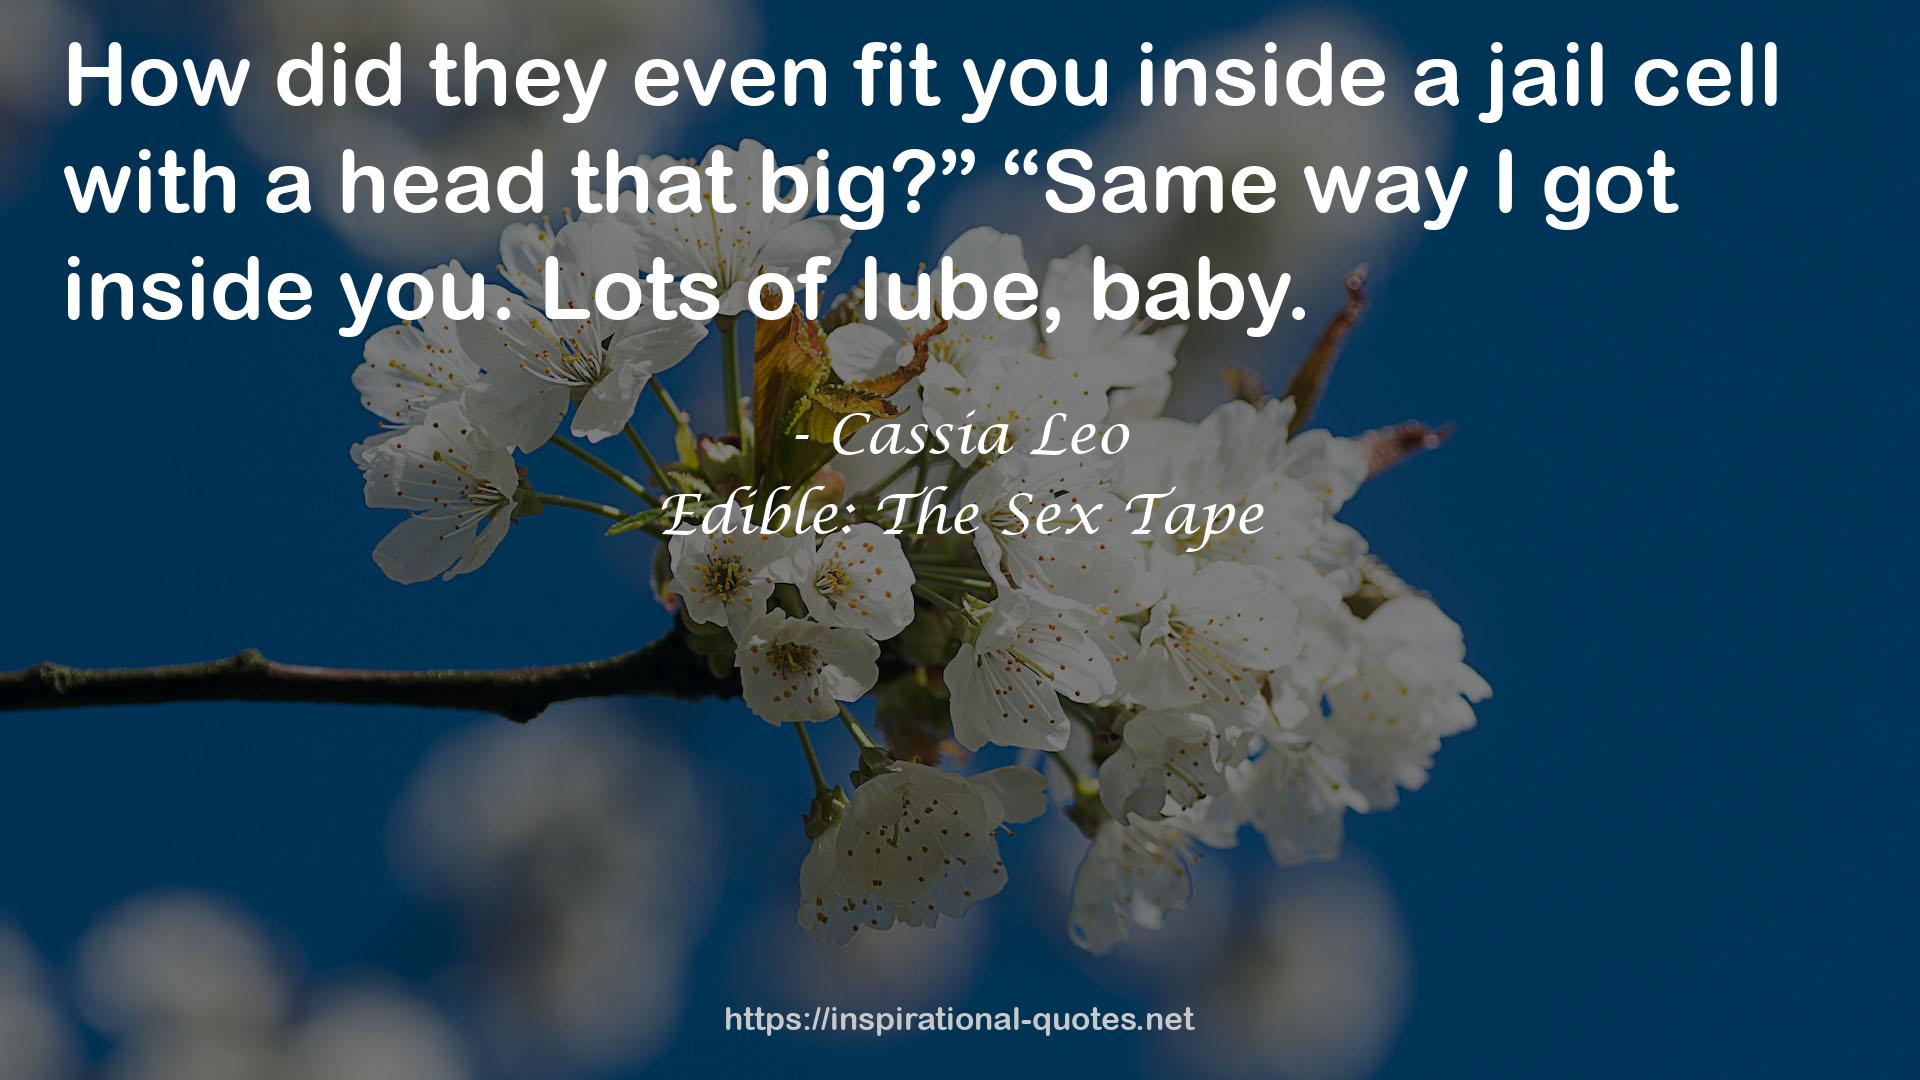 Edible: The Sex Tape QUOTES